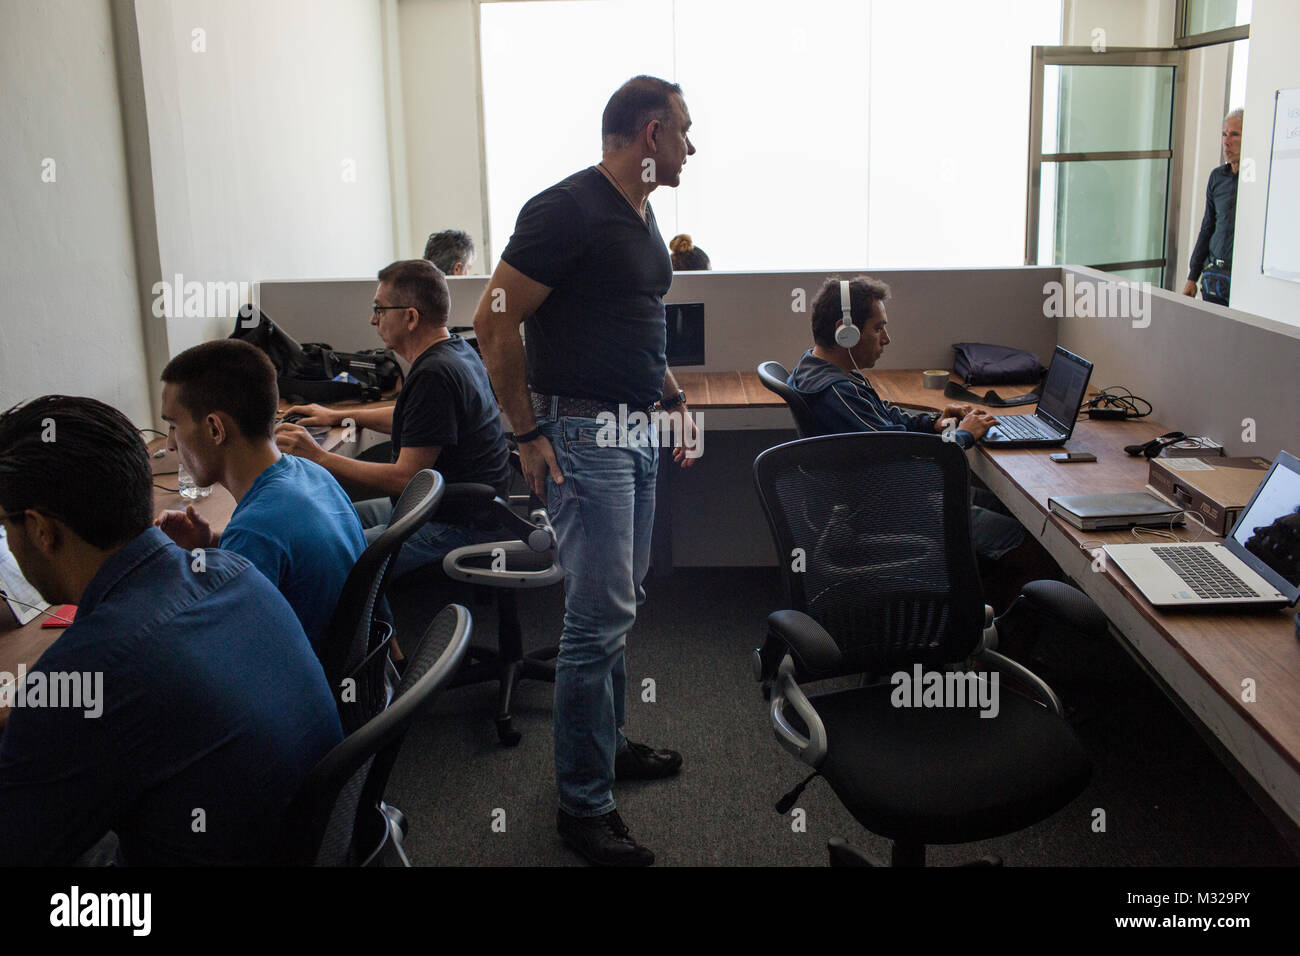 Entrepreneur Carlos Mimenza at his media company: The New Revolution News's officer in Playa del Carmen, Mexico, on July 11, 2017. Mimenza represents a group of business owners who employ security forces to protect their businesses from extortion. Stock Photo